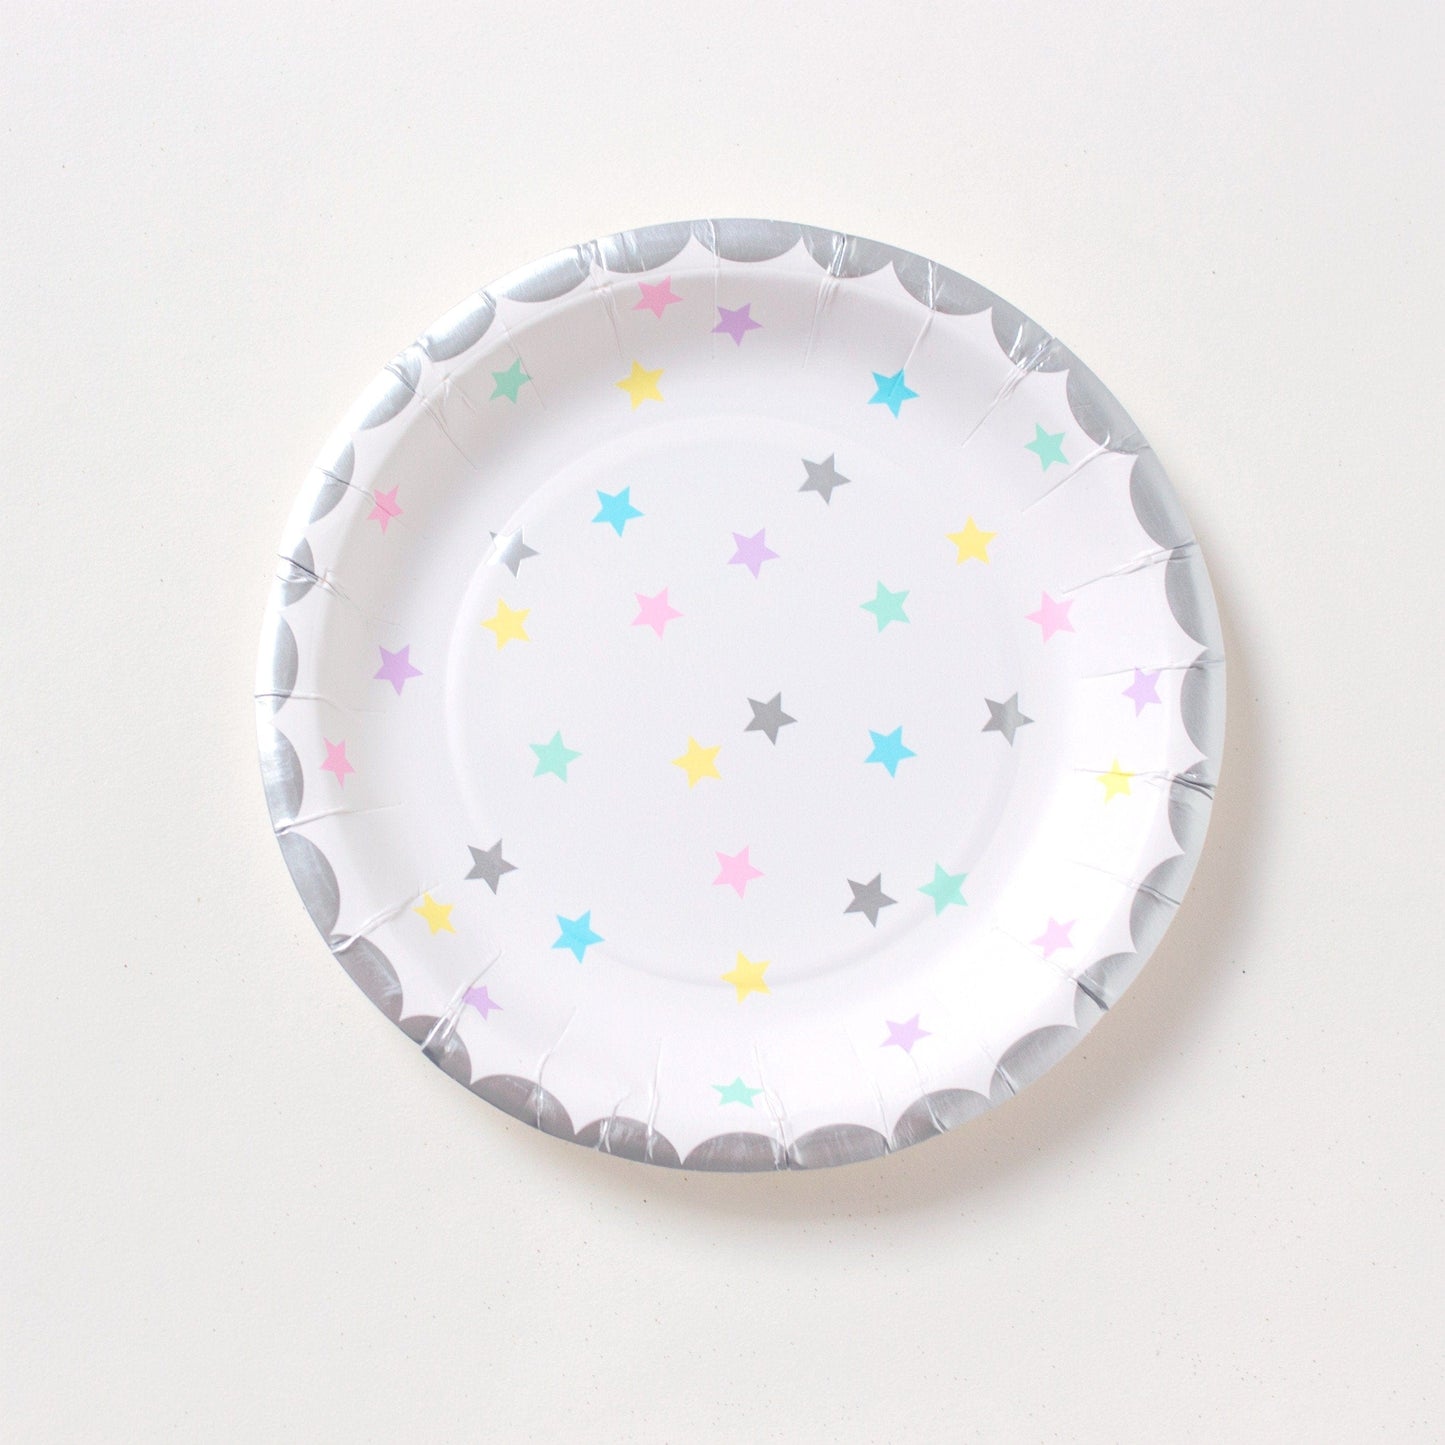 Unicorn Party Cups Little Stars | Stylish Kids Party Supplies Party Deco